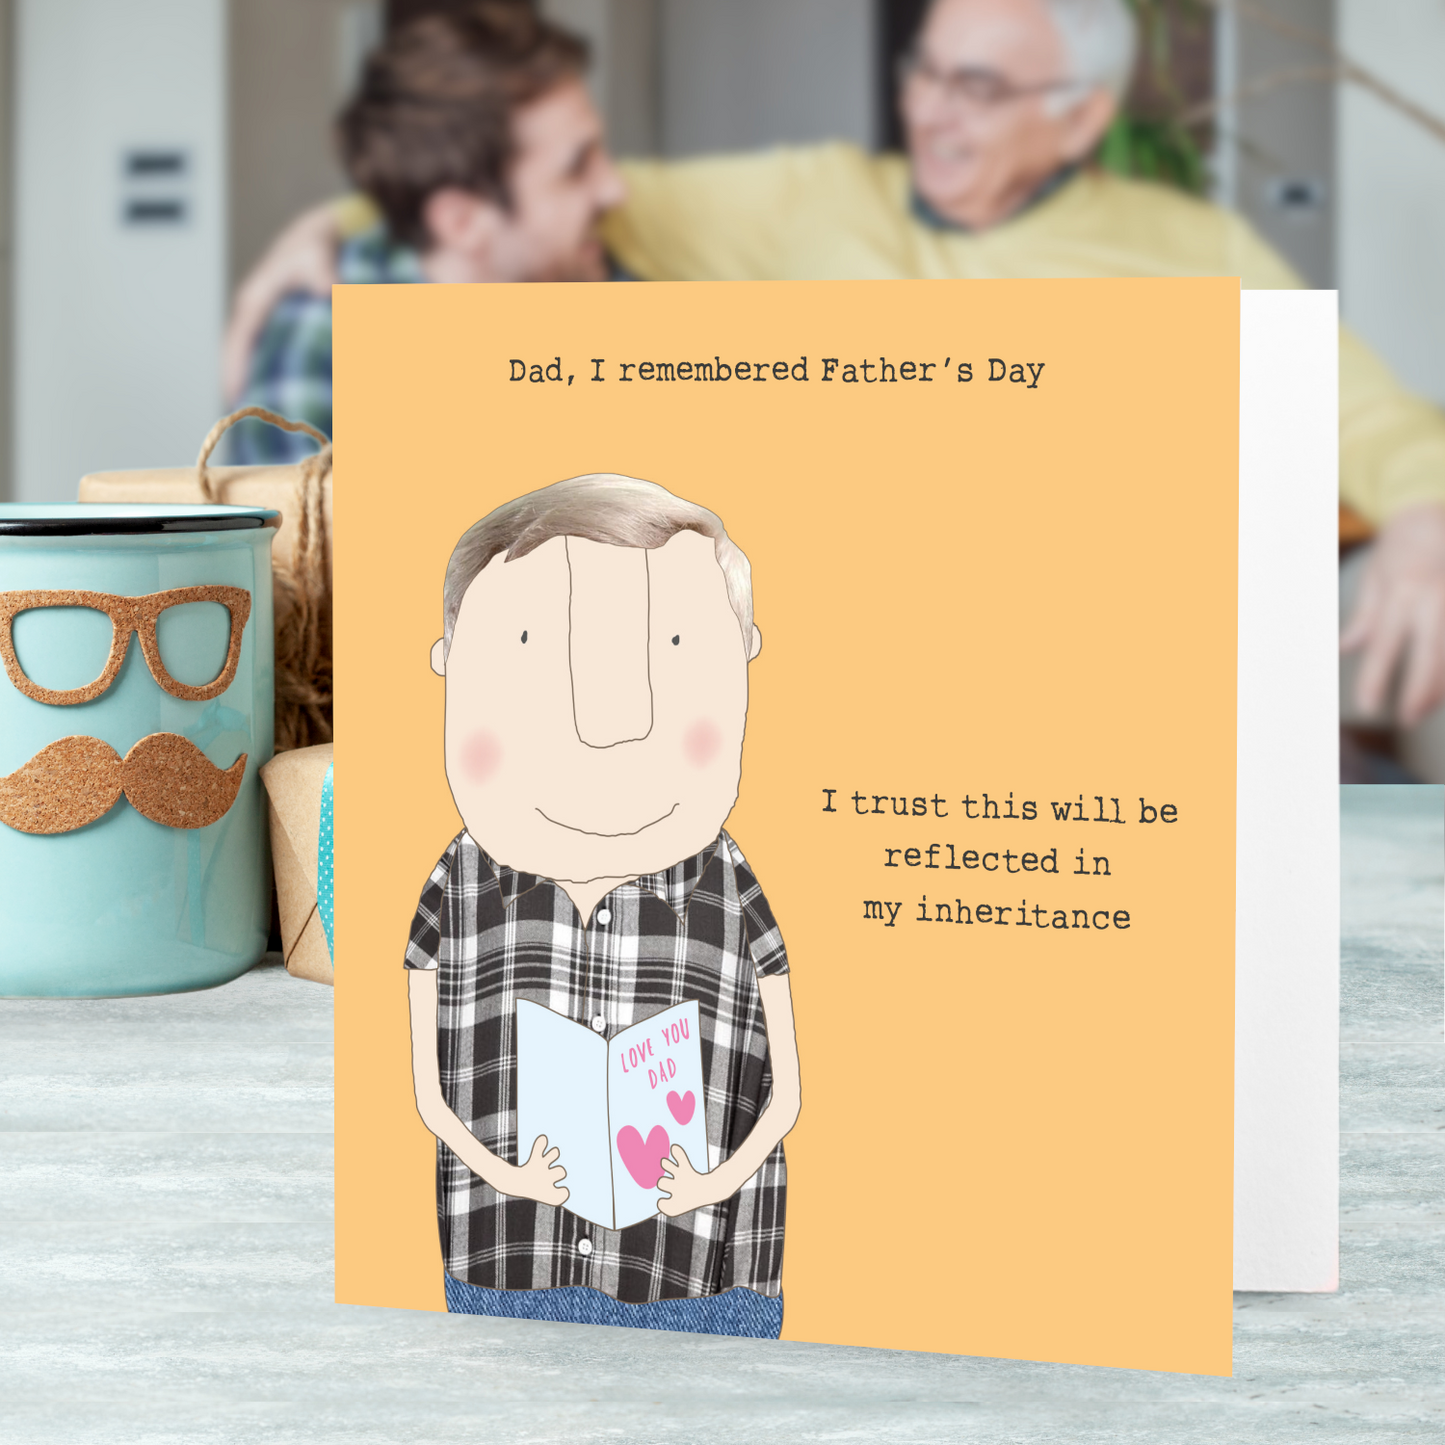 Rosie Made A Thing Remembered Father's Day Father's Day Funny Greeting Card